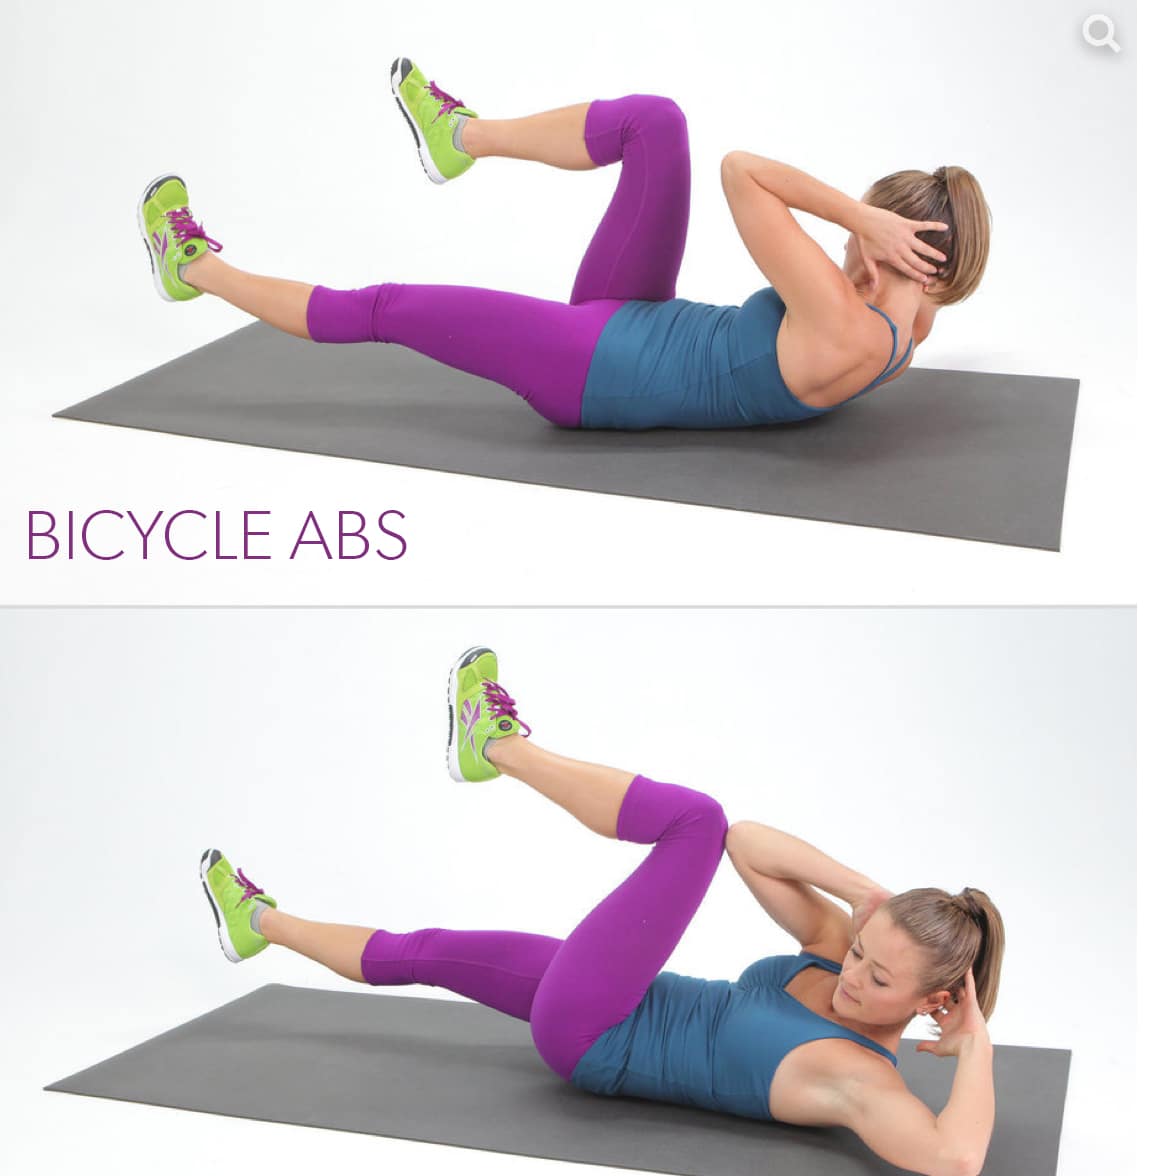 waist-workout-2-bicycle-abs